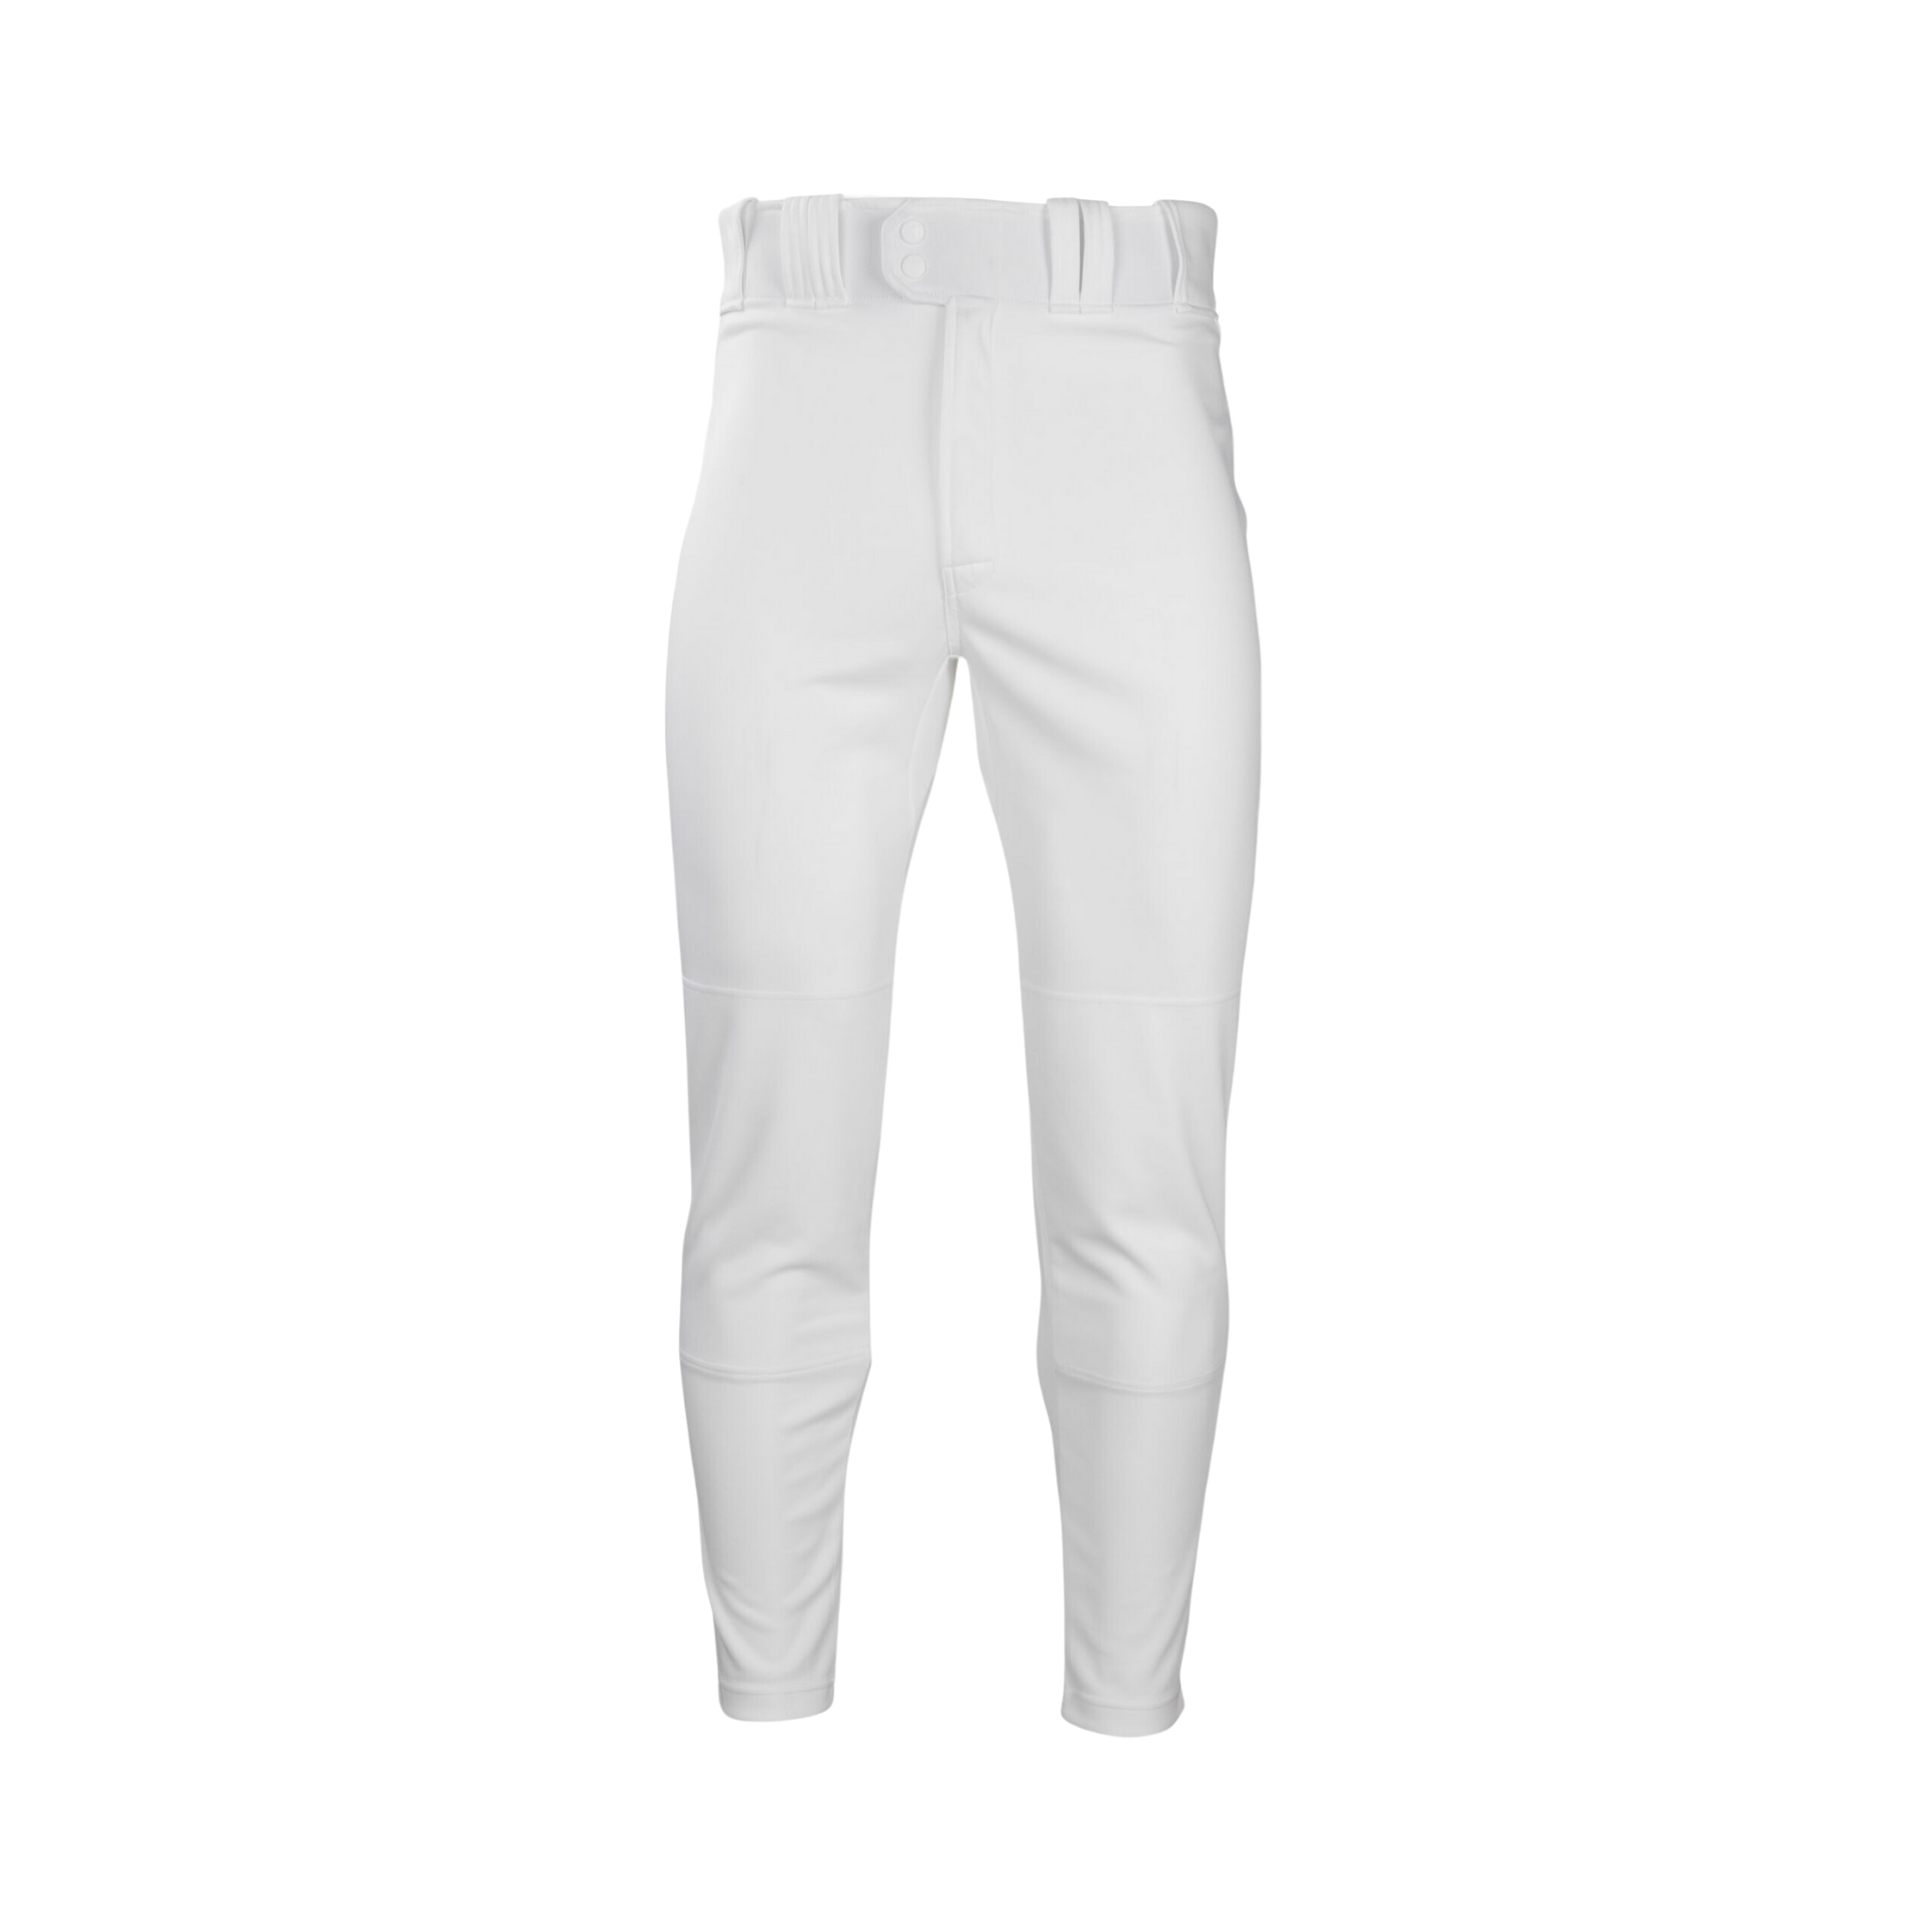 Rawlings Adult 150 Jogger Fit Pant White